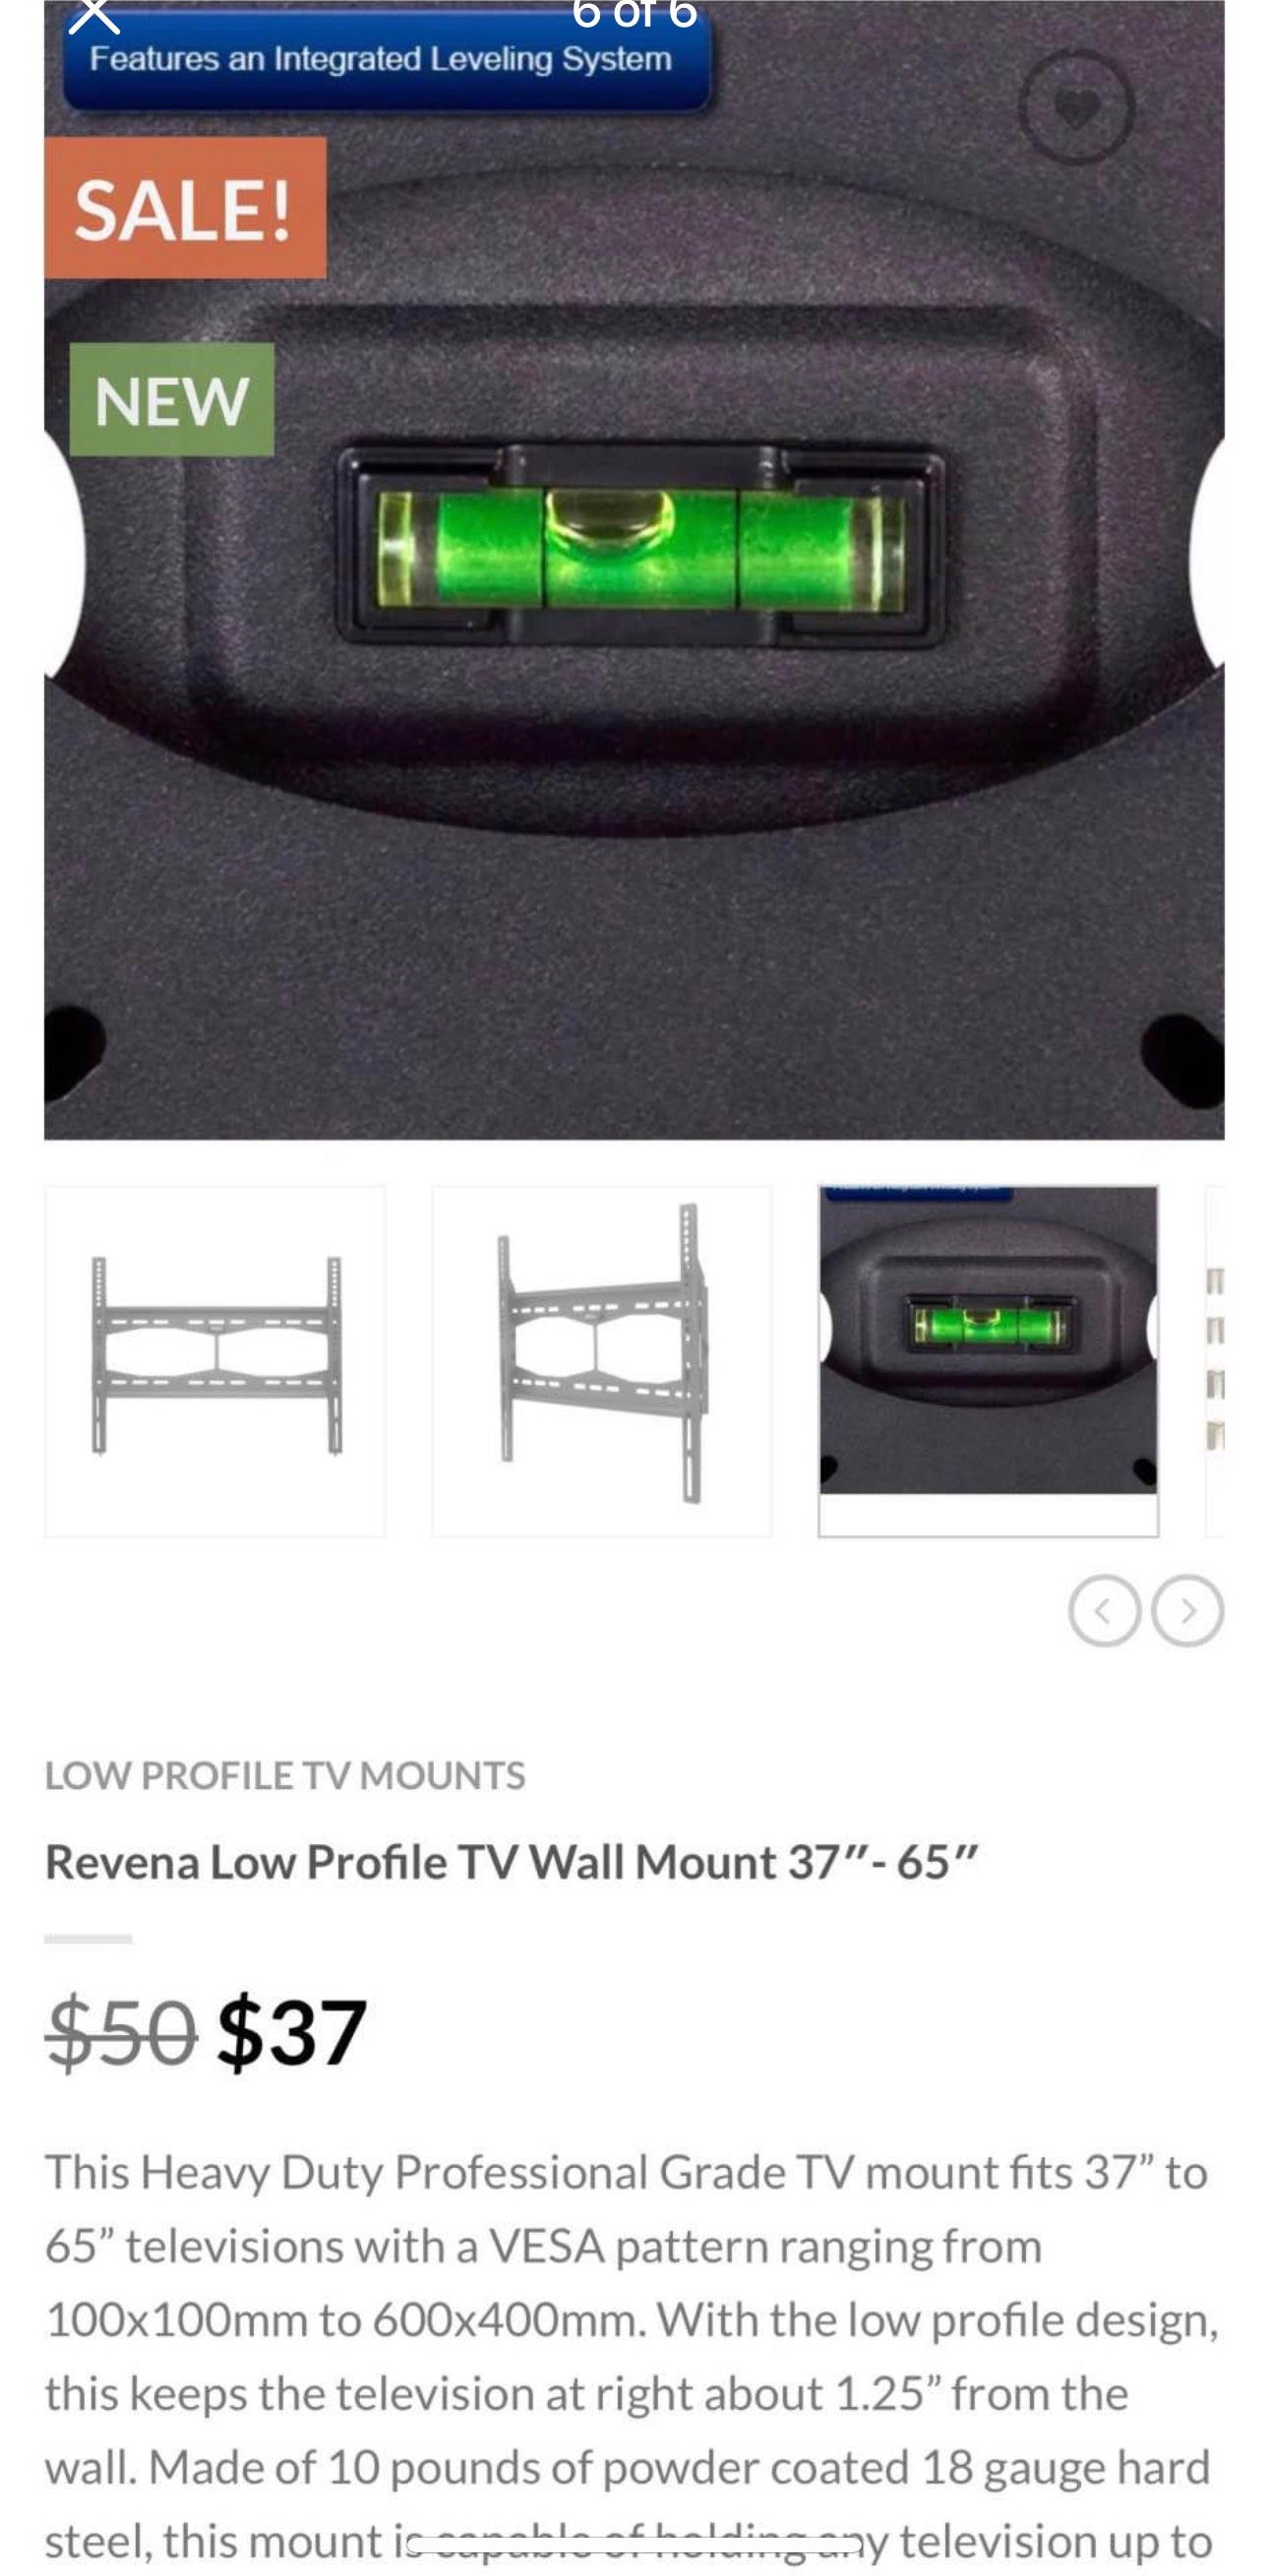 Brand New Revéna Flat Wall Mount for 37"-65" TVs - Mount Your TV with Ease!